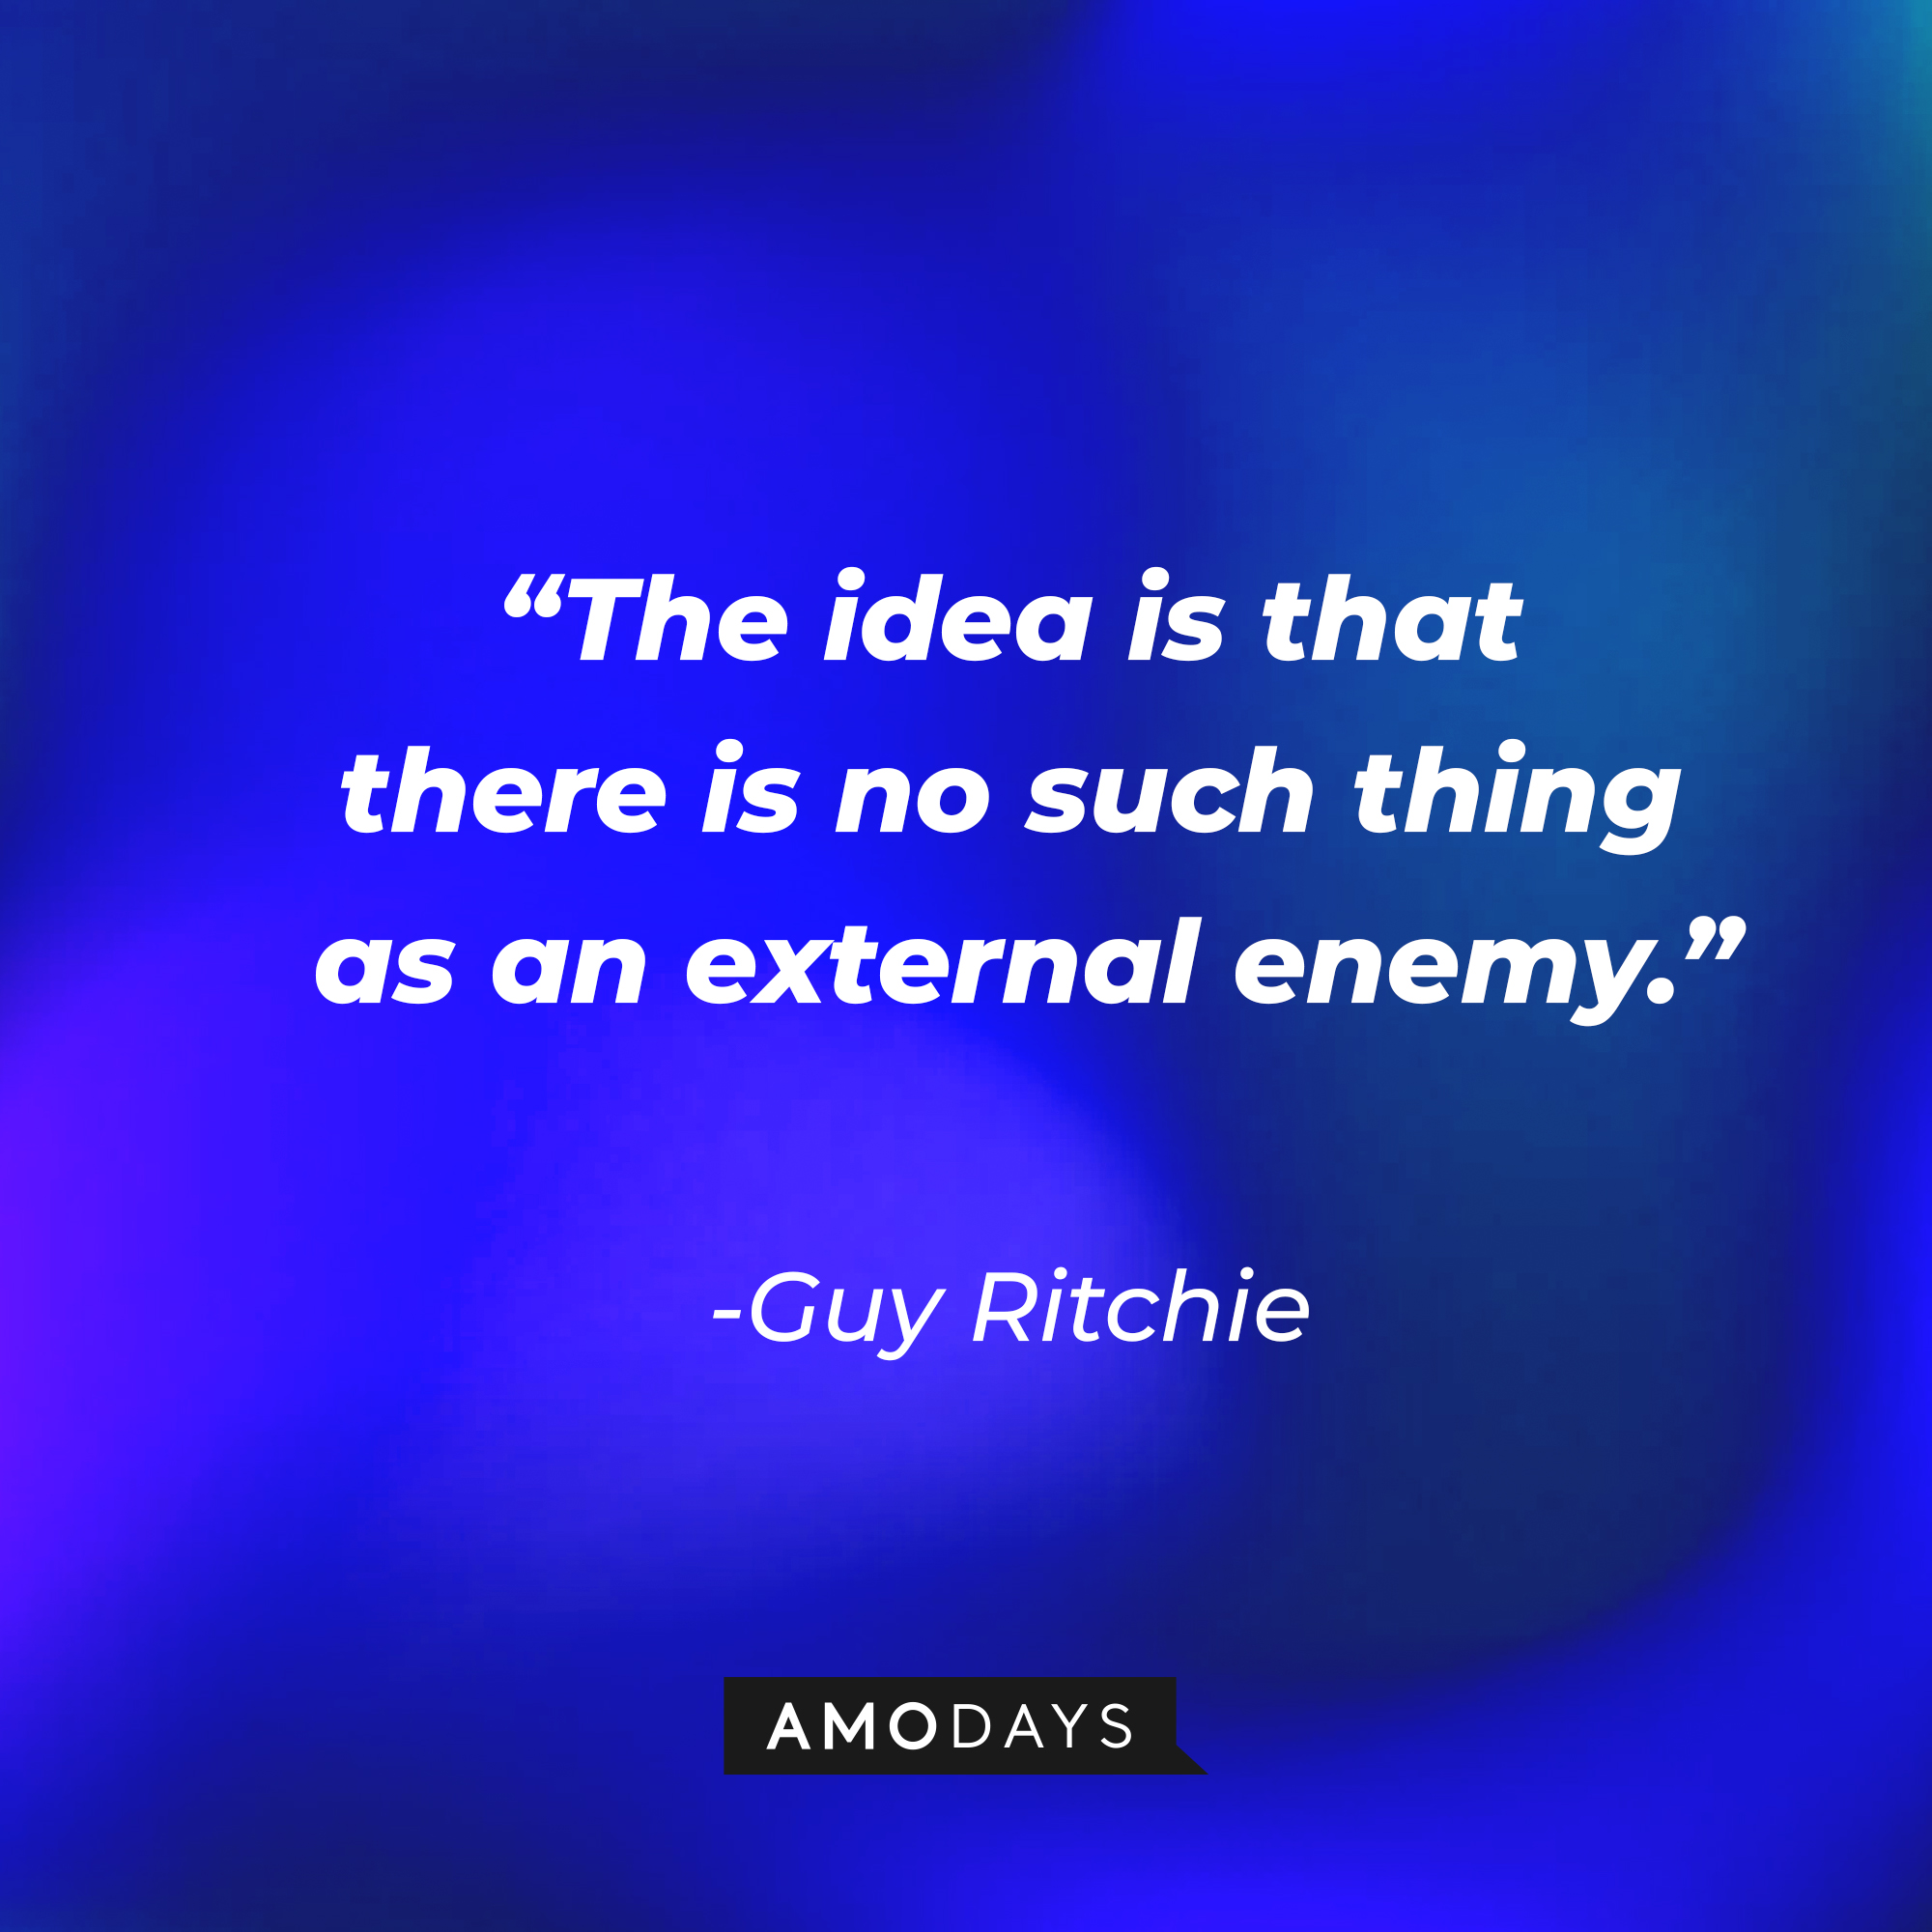 Guy Ritchie's quote, “The idea is that there is no such thing as an external enemy.” | Source: AmoDays